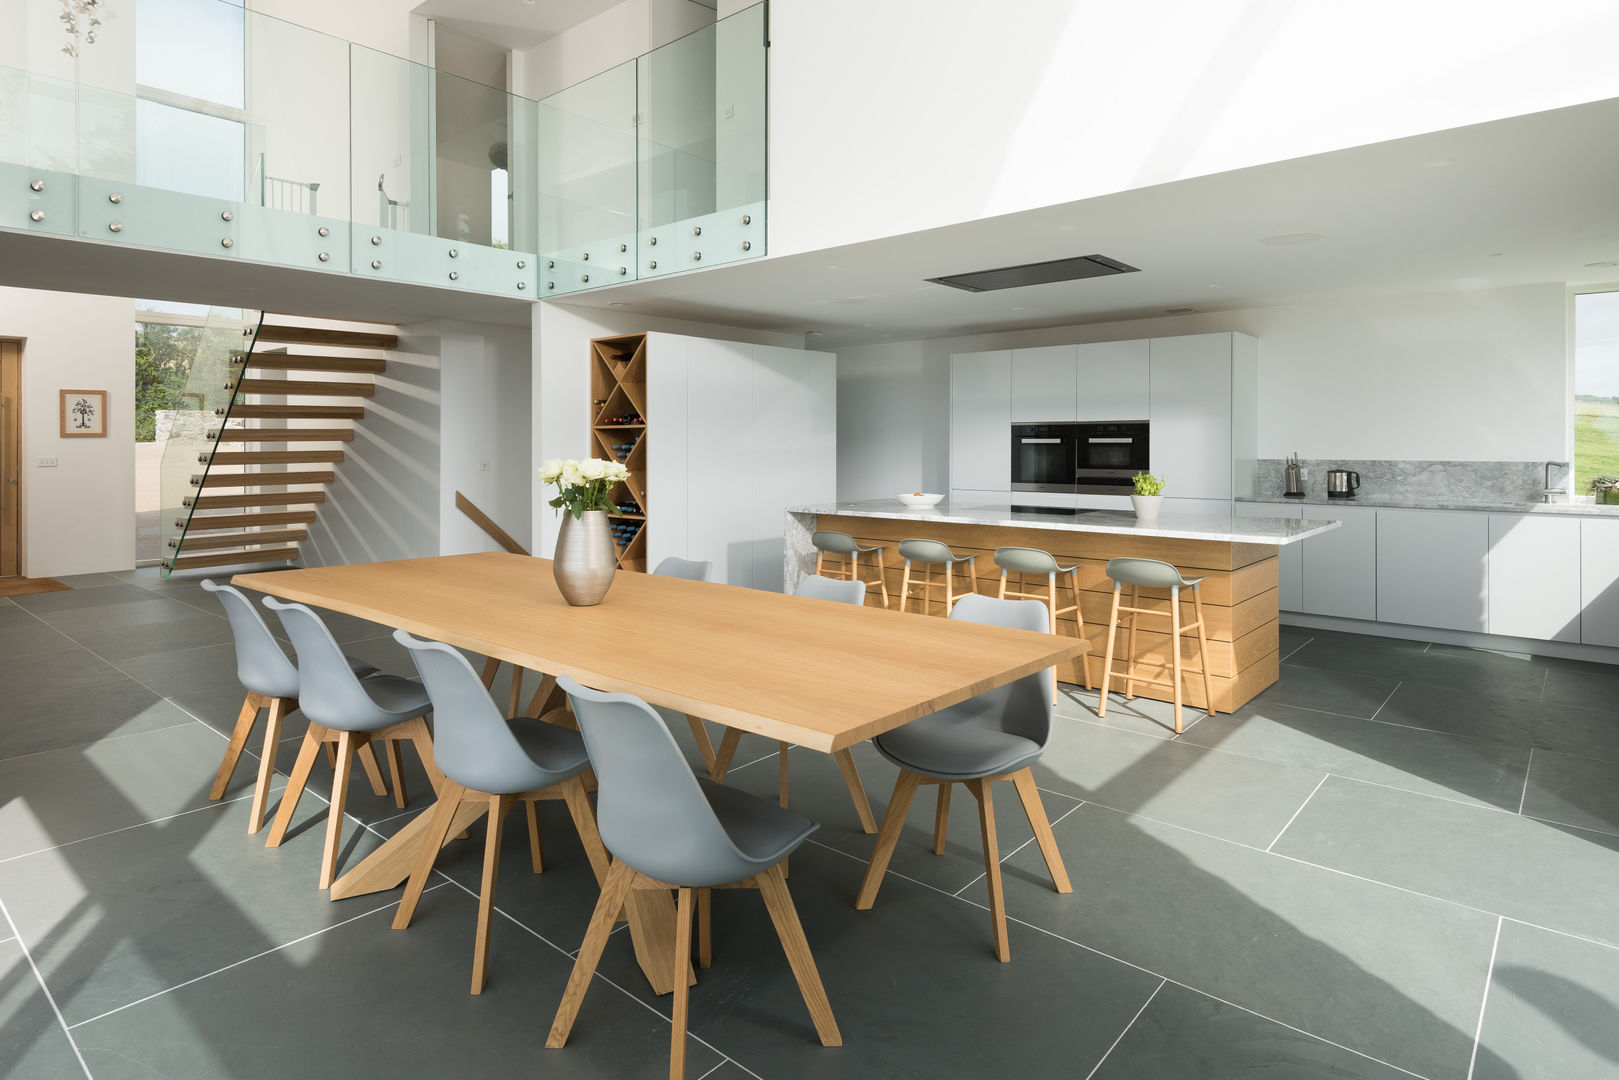 Contemporary Replacement Dwelling, Cubert, Laurence Associates Laurence Associates Modern dining room kitchen,dining room,open plan,open space kitchen,dining table,dining chairs,mezzanine,stairs,white kitchen,flooring,modern,contemporary